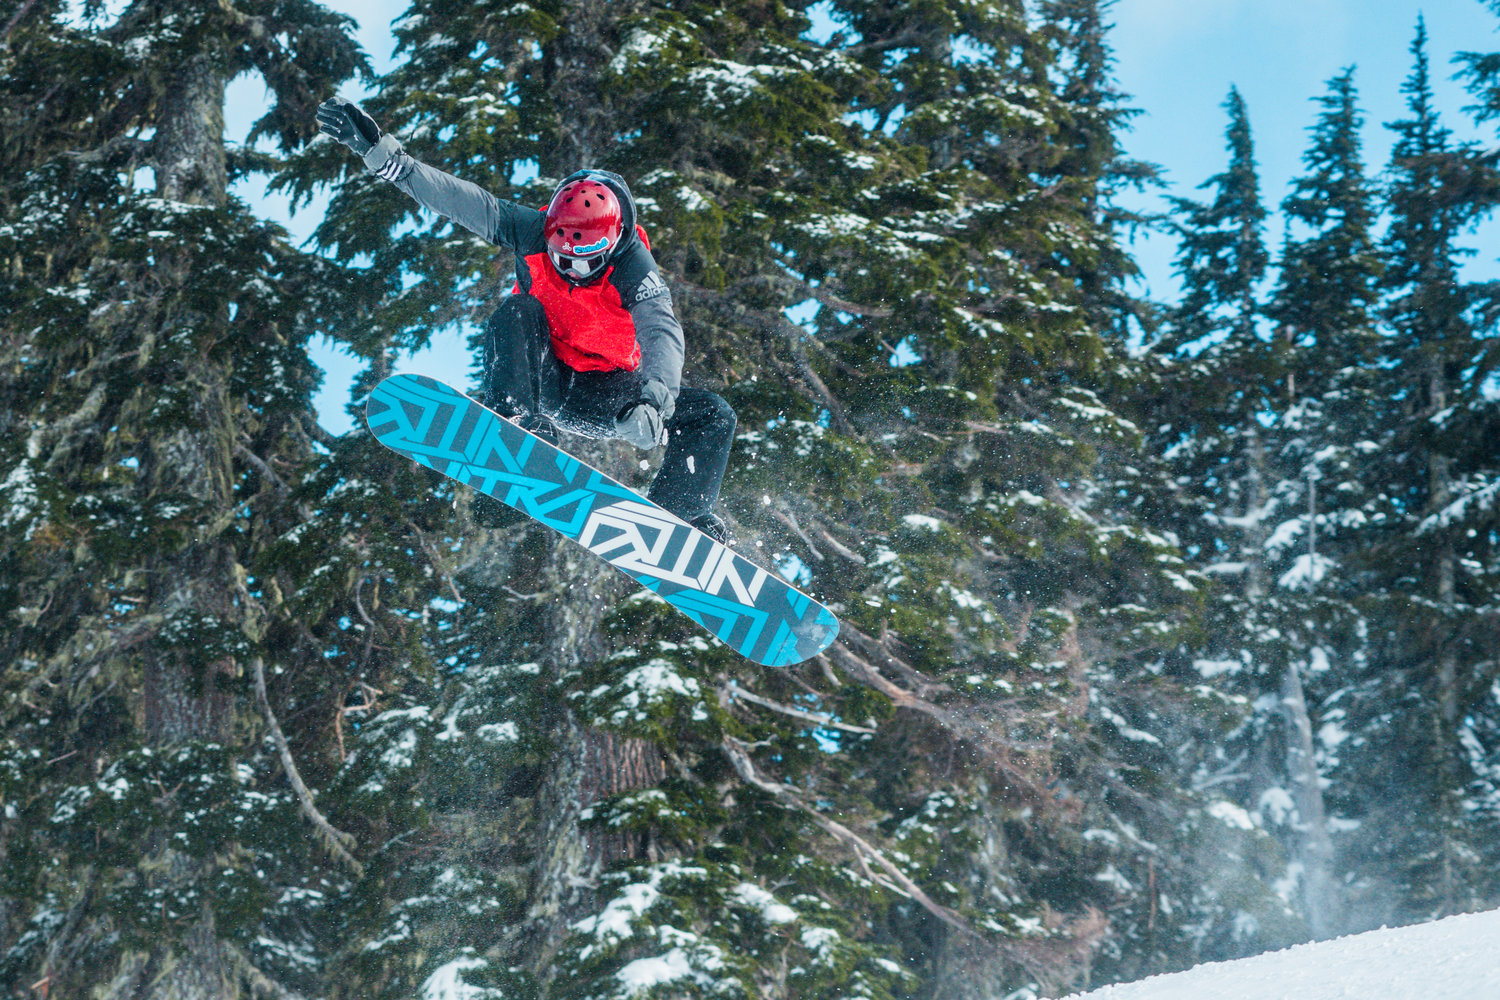 A snowboarder takes air at the Ribeye jump park inside the White Pass Ski Area on Sunday.